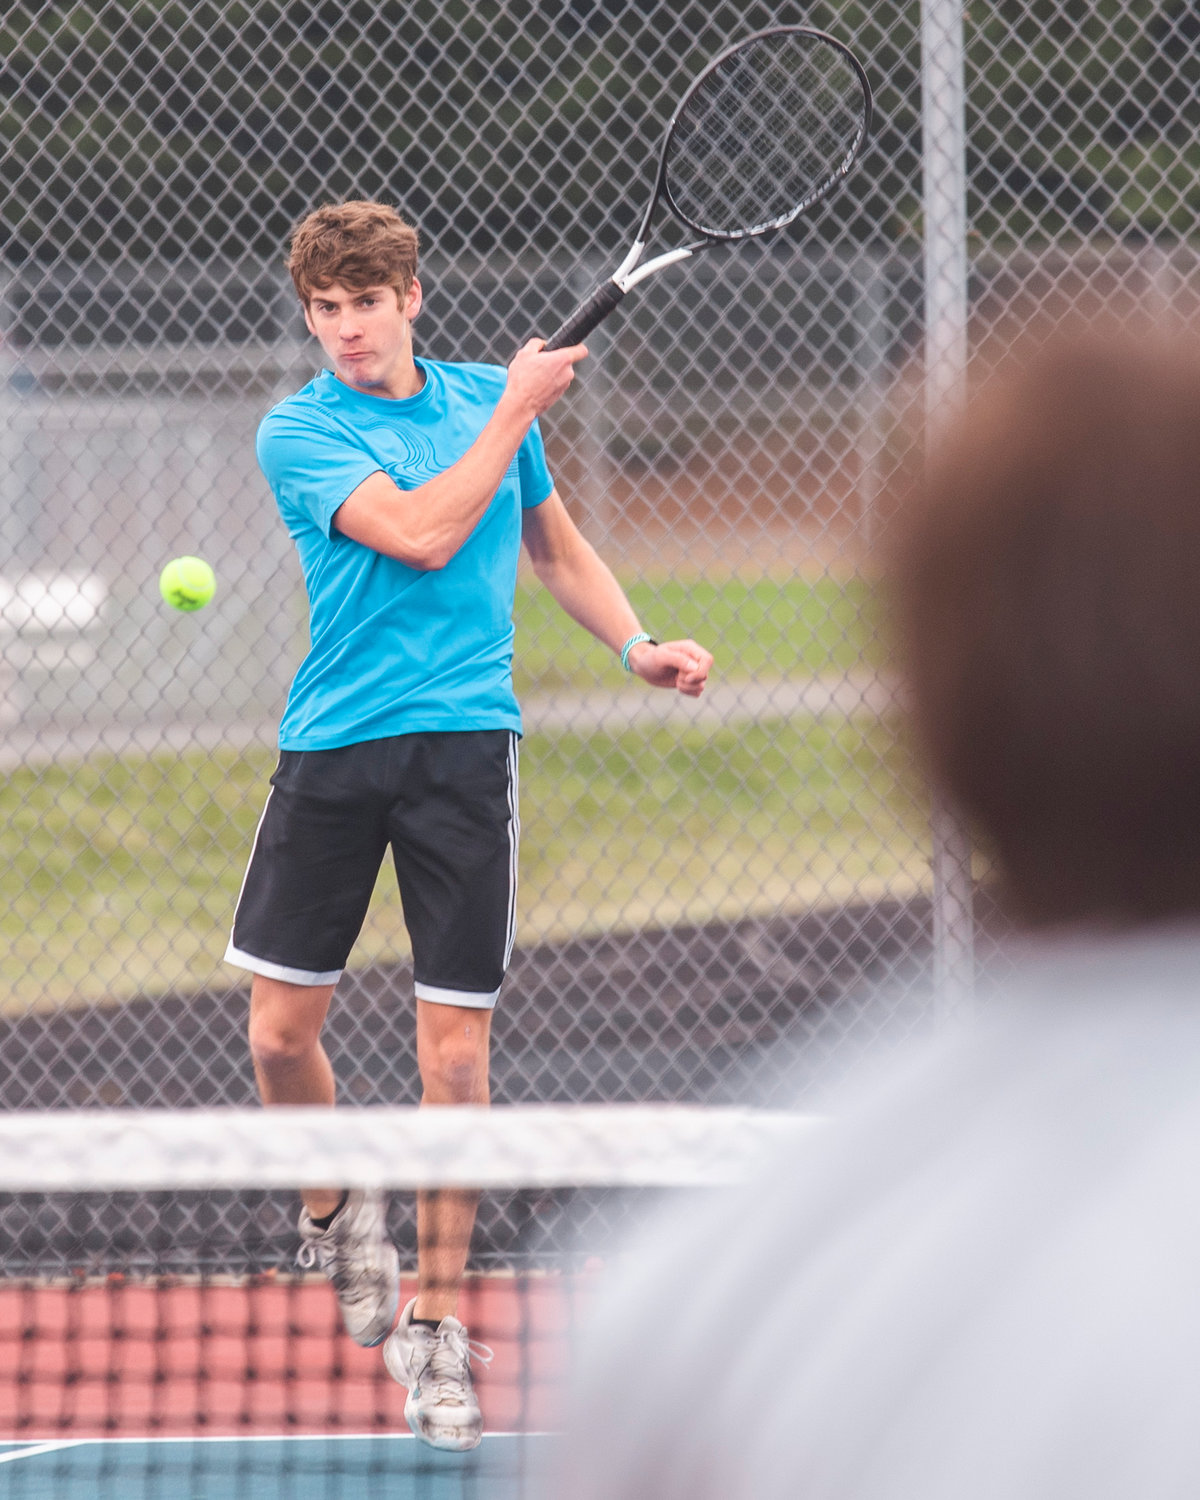 W.F. West’s Aaron Boggess watches his shot during a doubles match at Black Hills High School Tuesday afternoon.